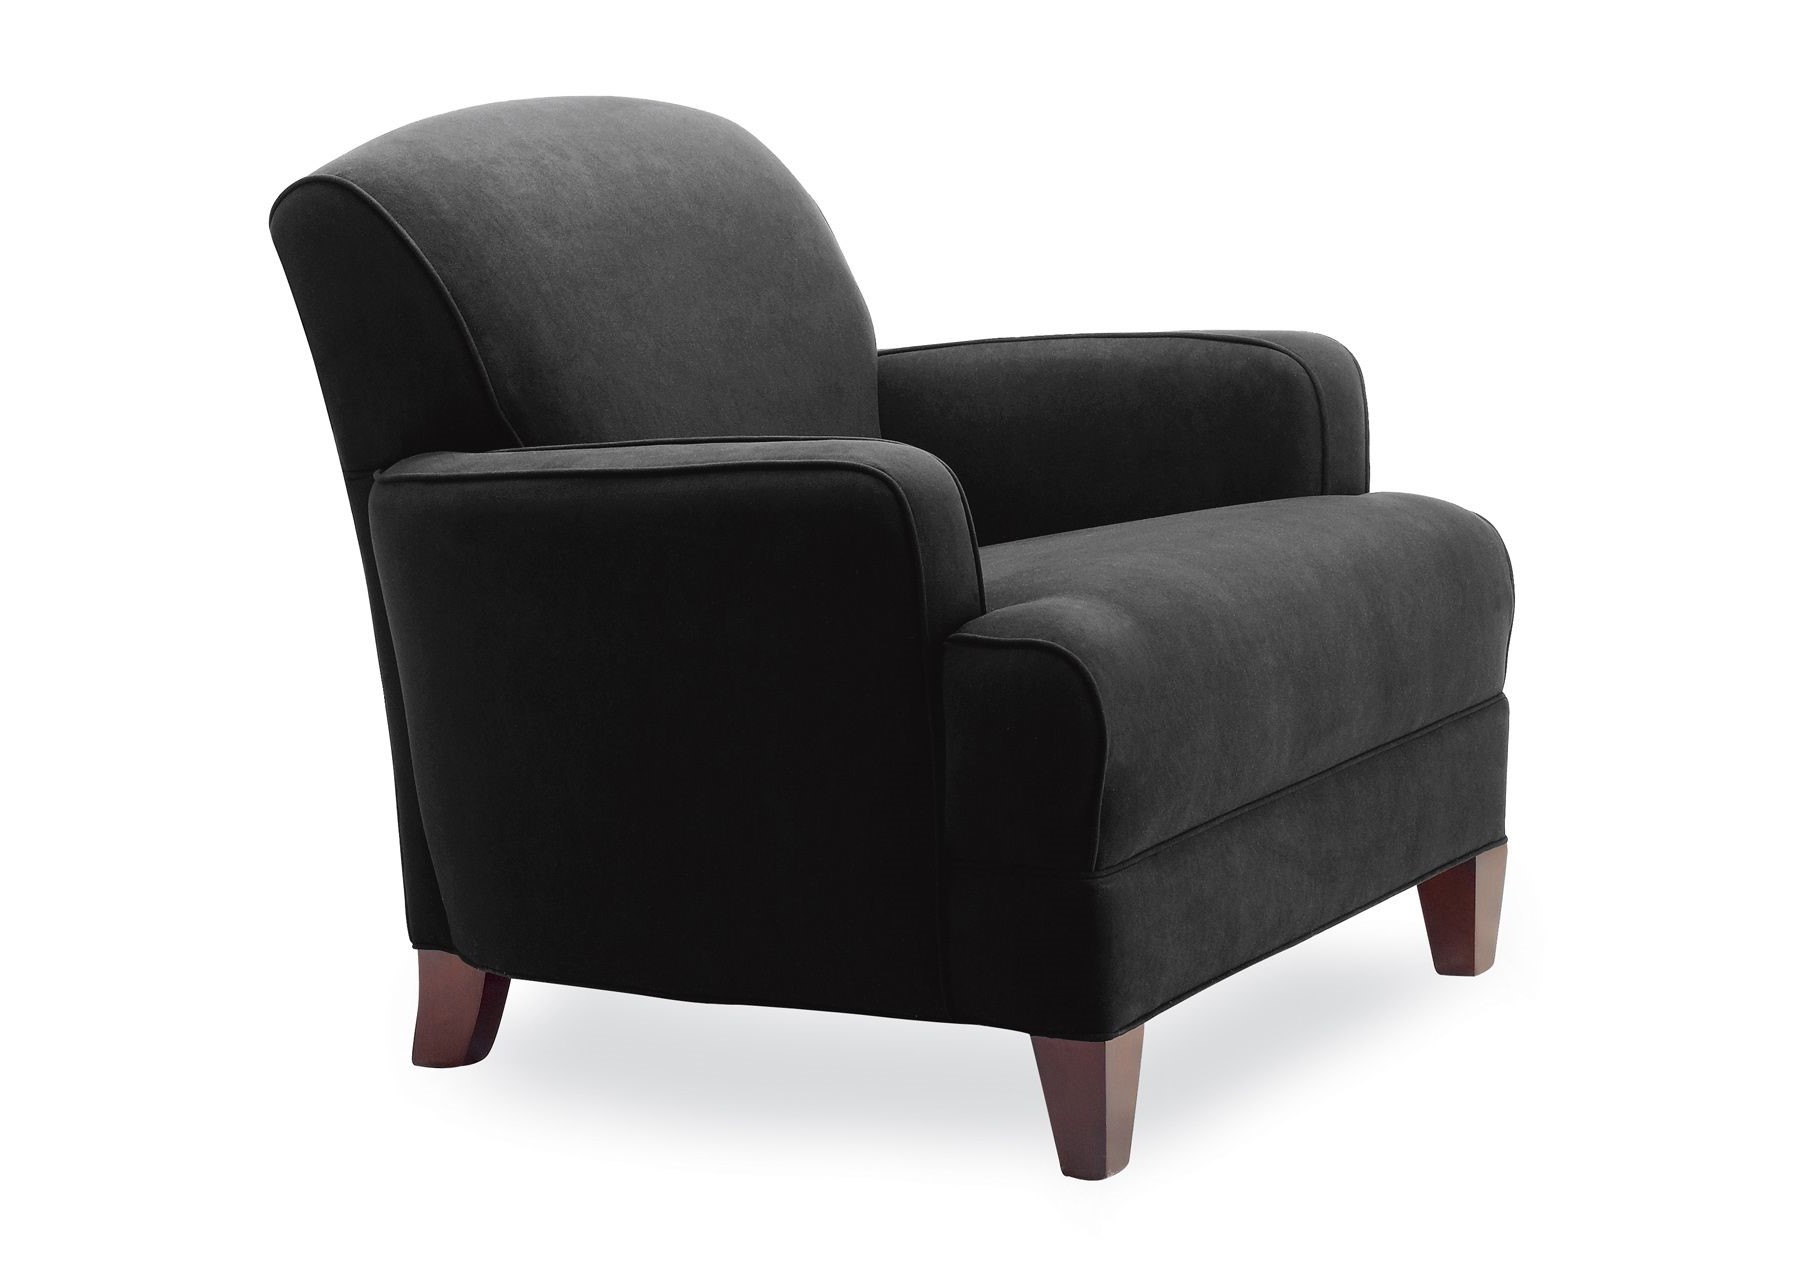  KENNET LOUNGE CHAIR